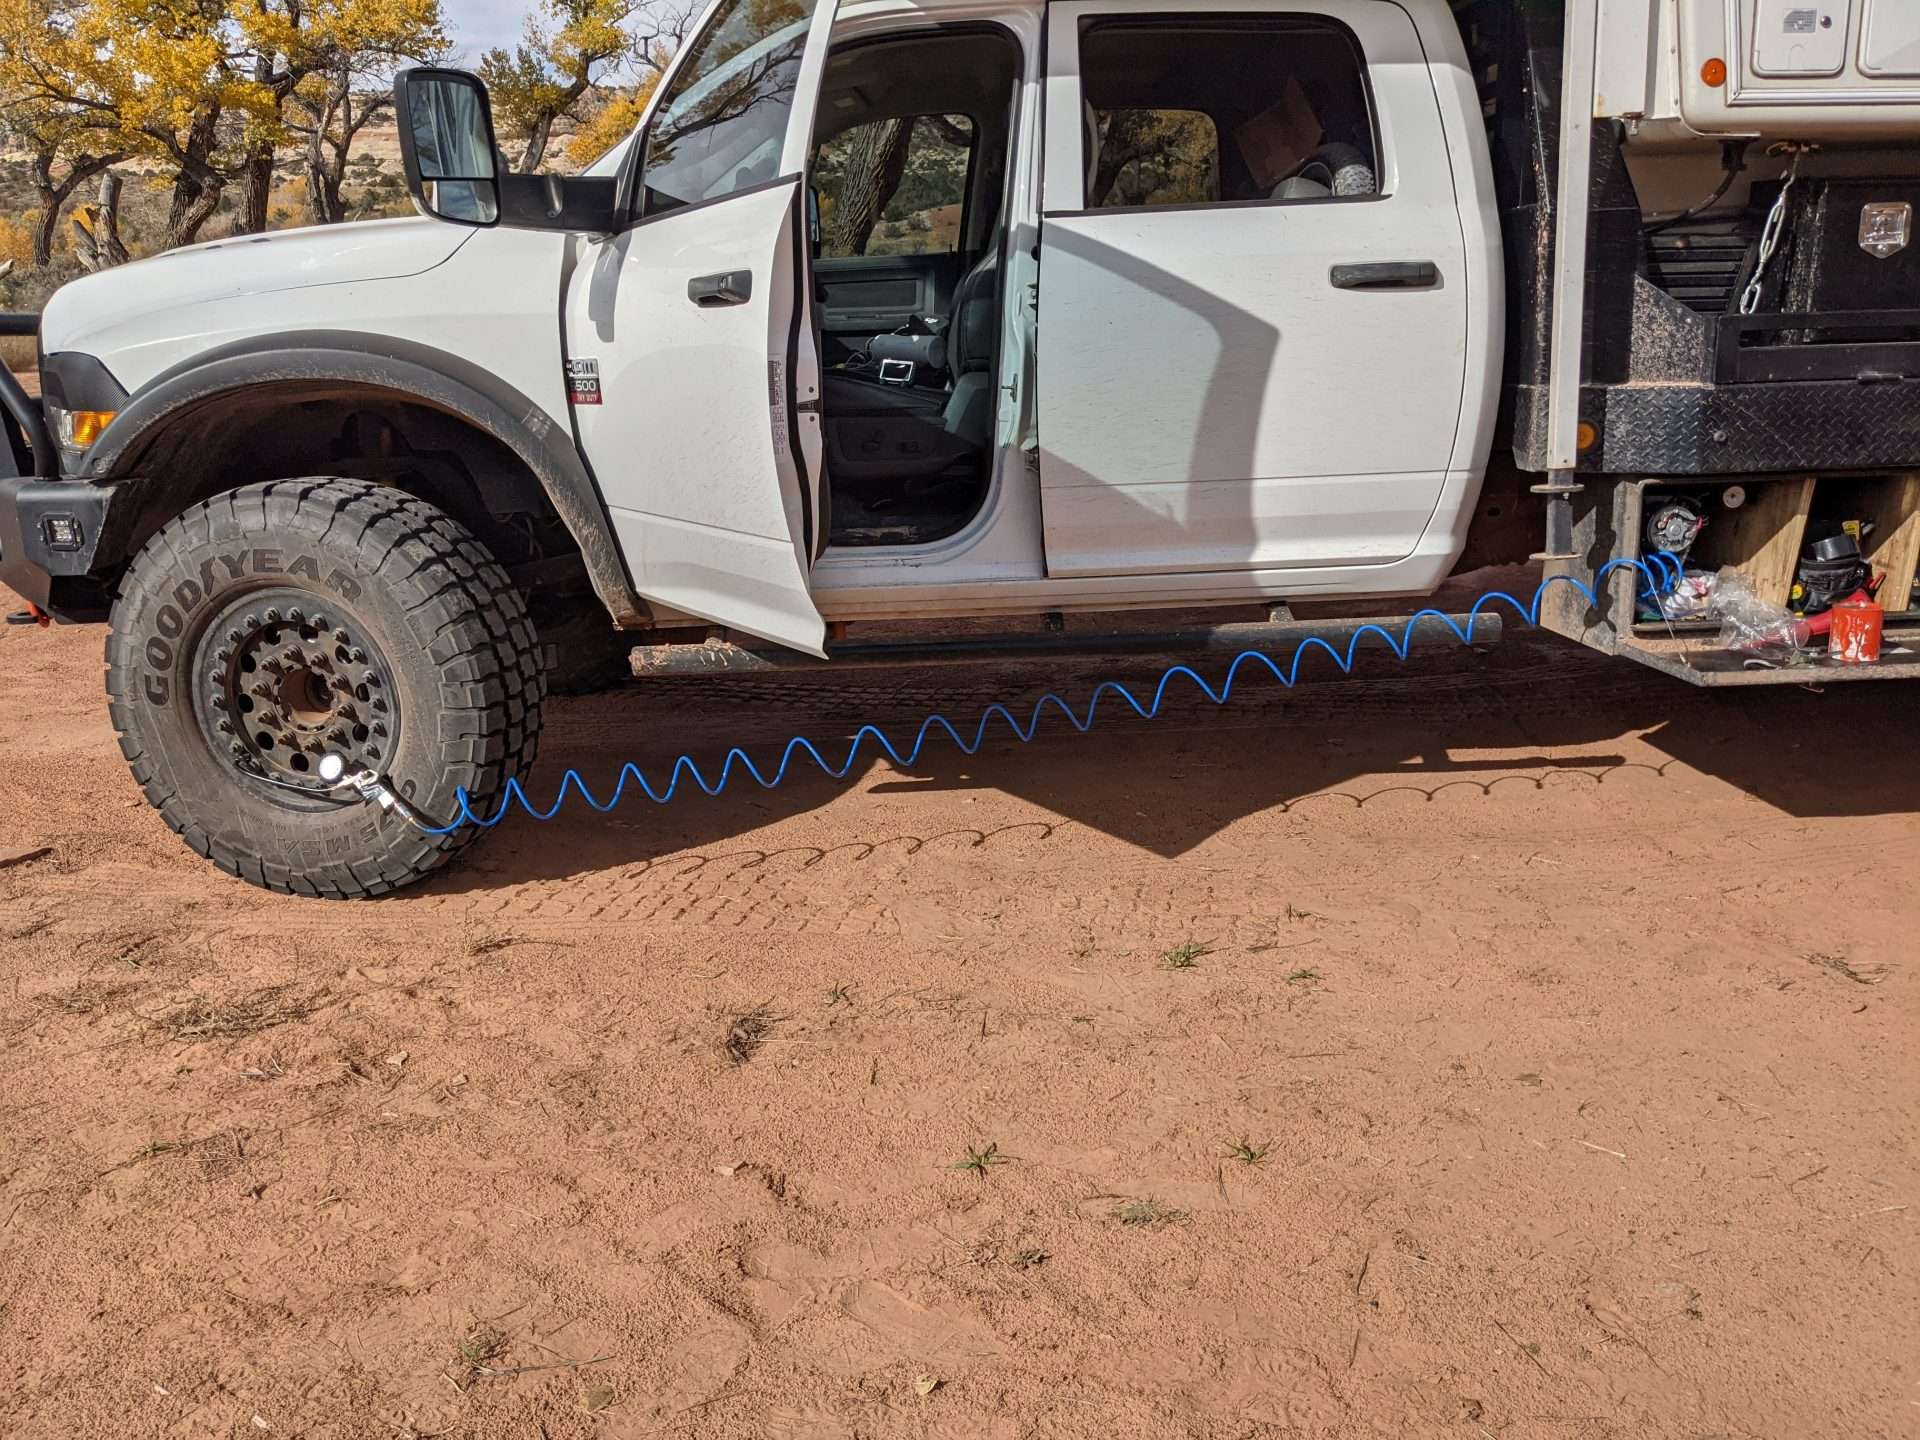 airing up off road tire